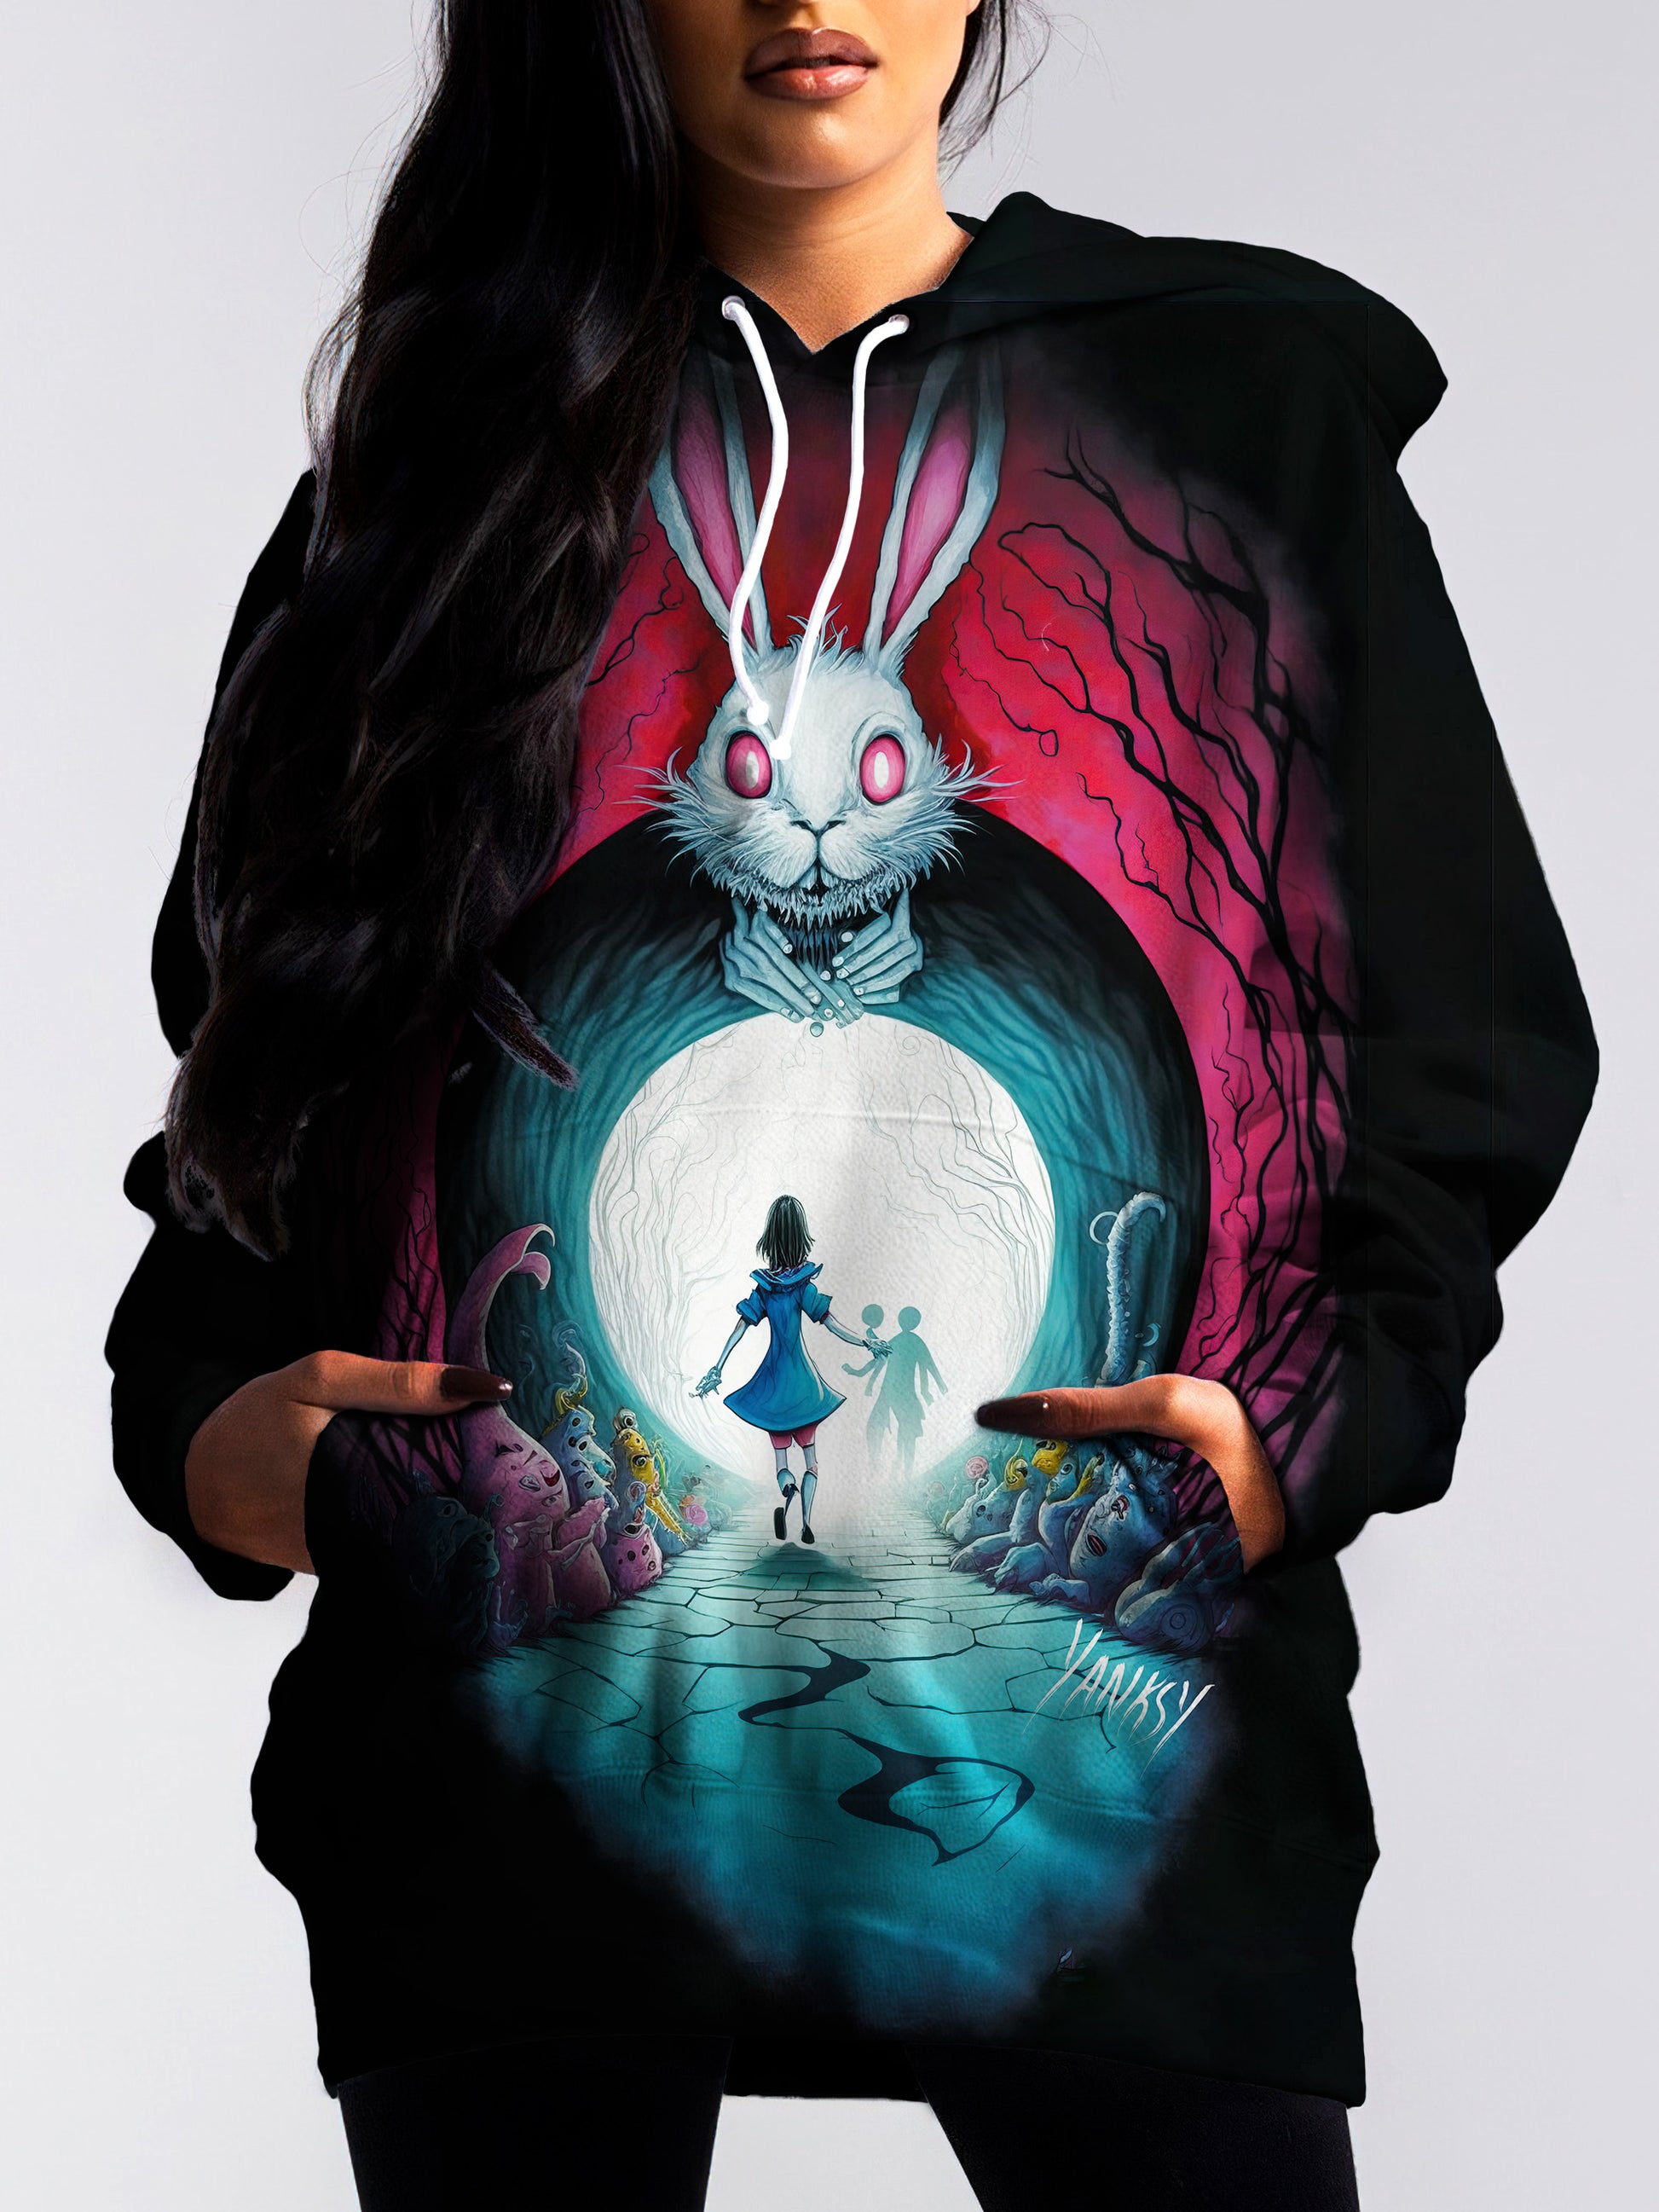 Embrace your inner artist with this one-of-a-kind hoodie